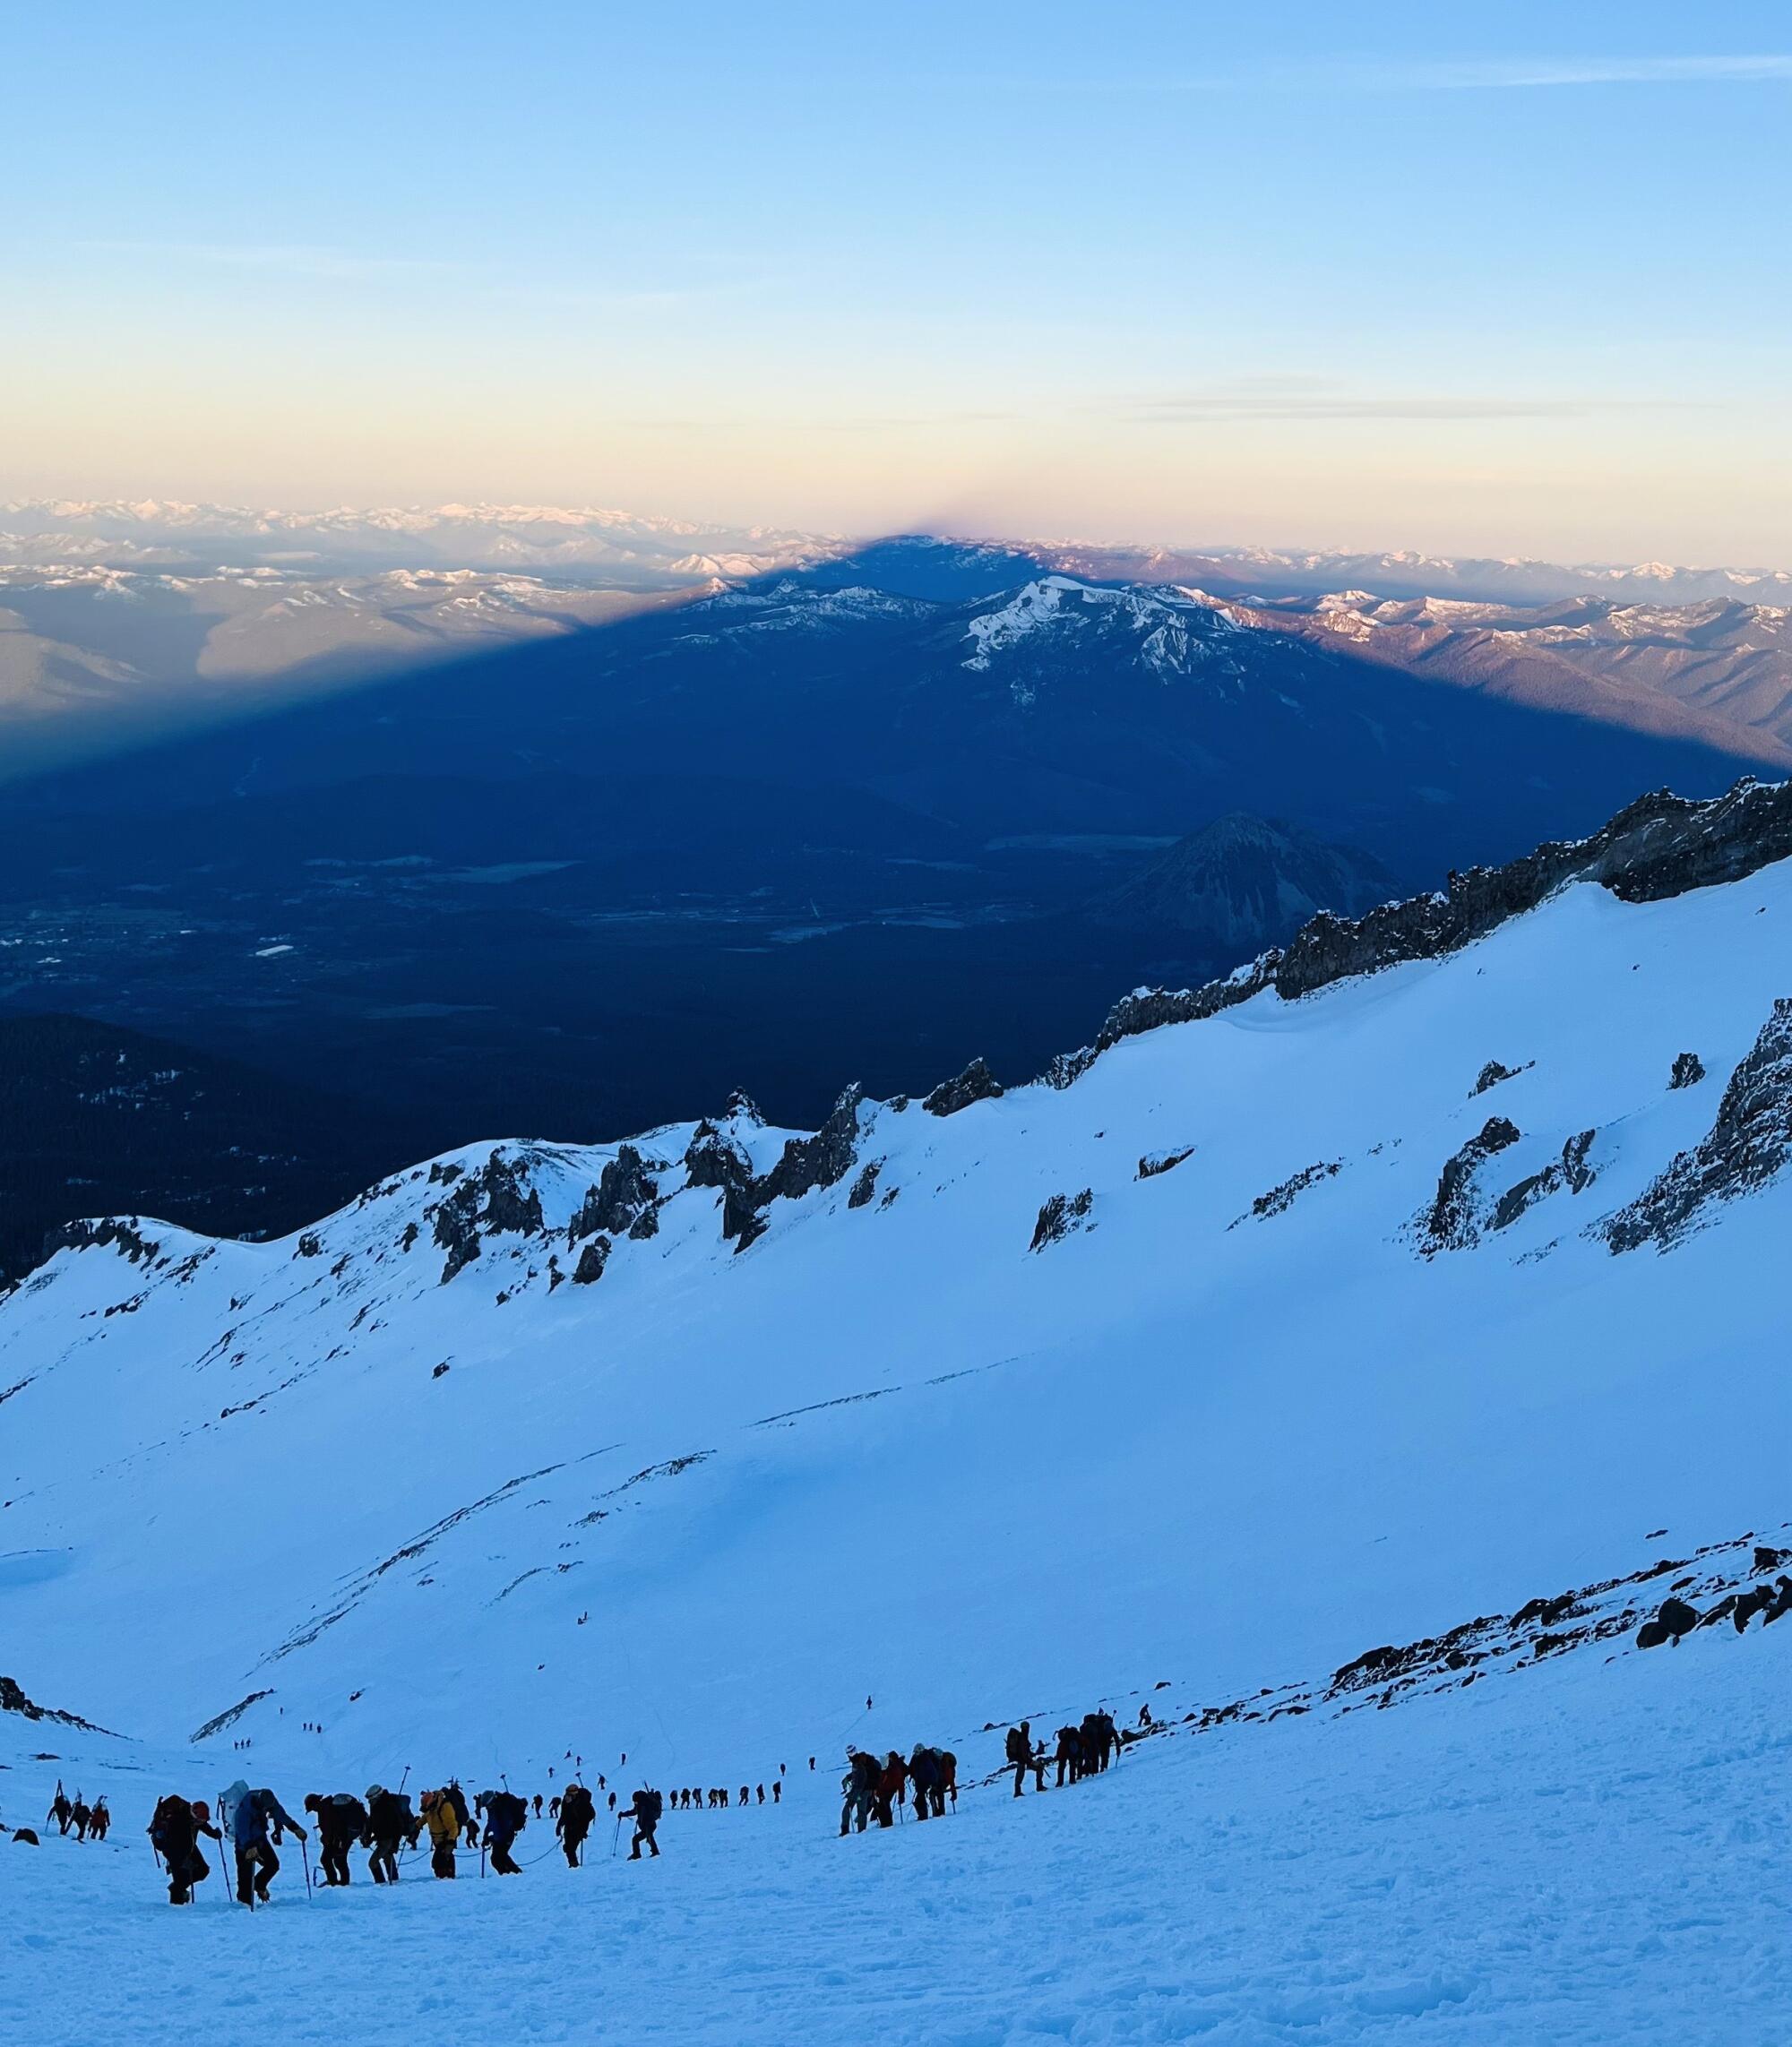 Groups of climbers on a snowy mountainside as a triangular shadow stretches into the distance.